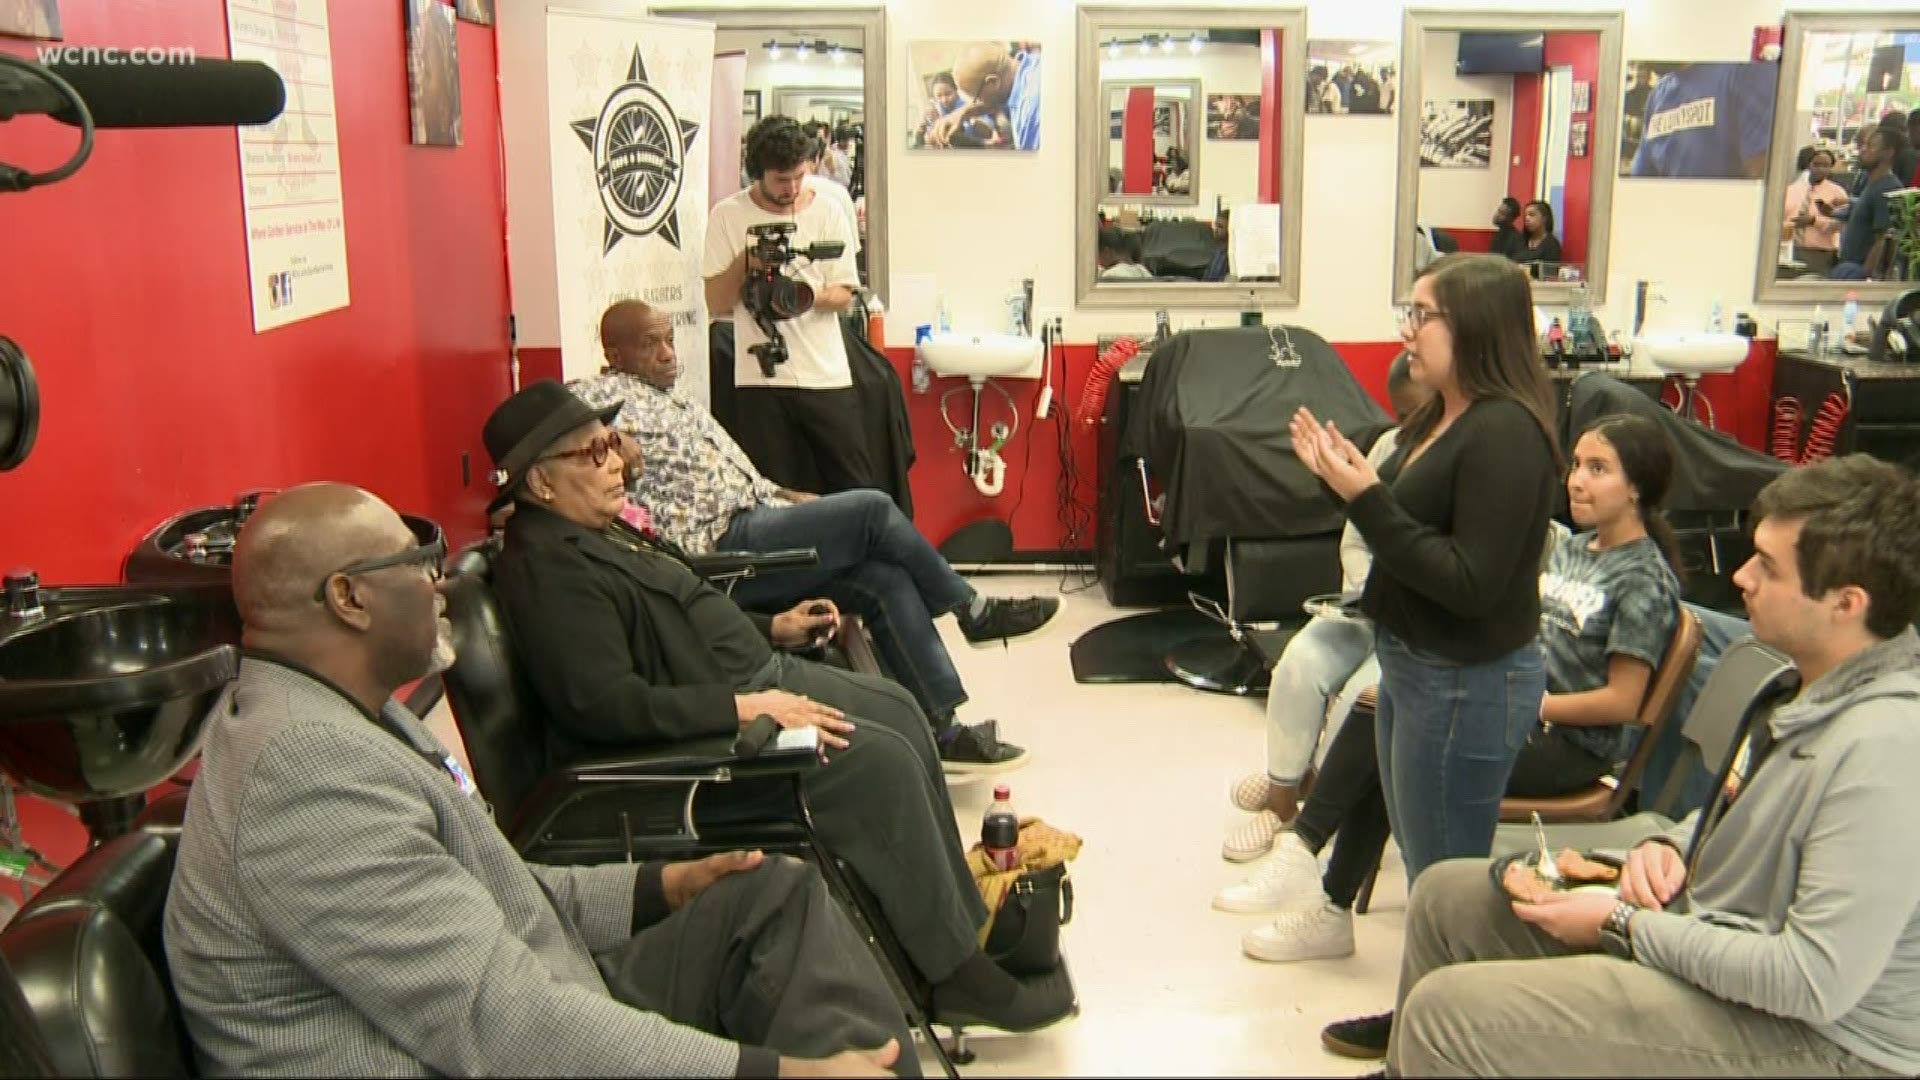 A local barbershop hosted high school and college students Tuesday night for a discussion about the growing crime rate in the area.